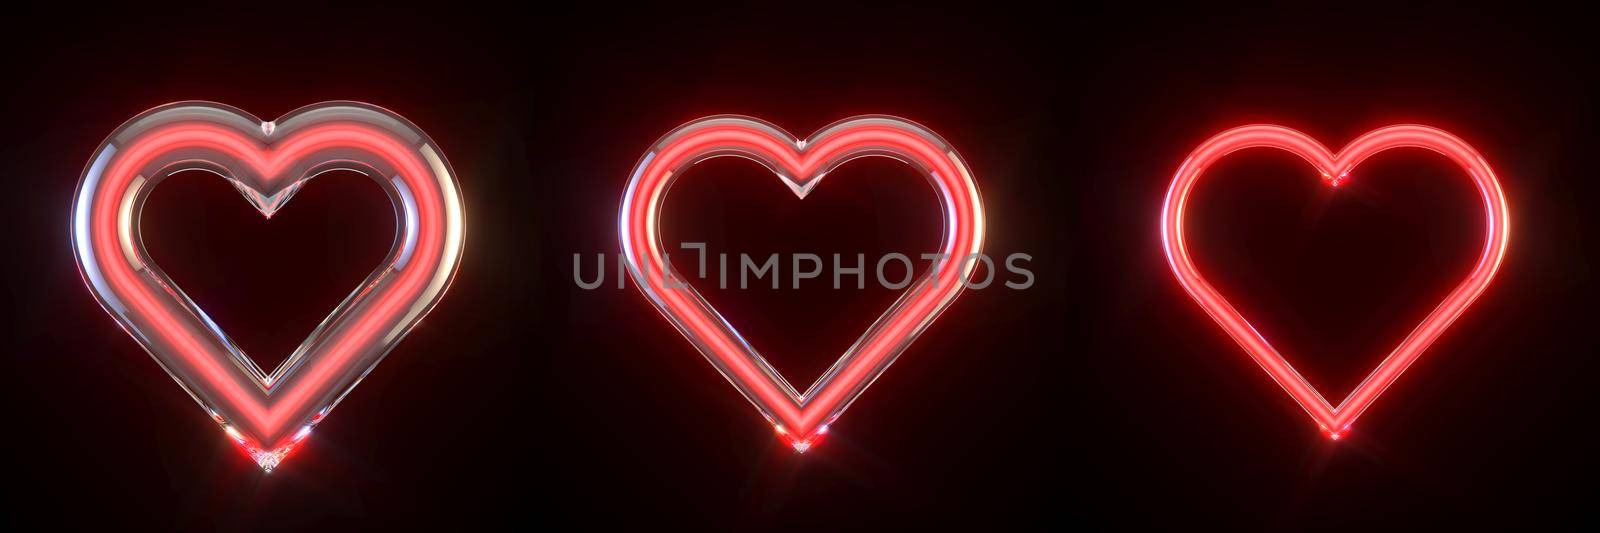 Three neon glowing red hearts signs 3D rendering illustration isolated on black background